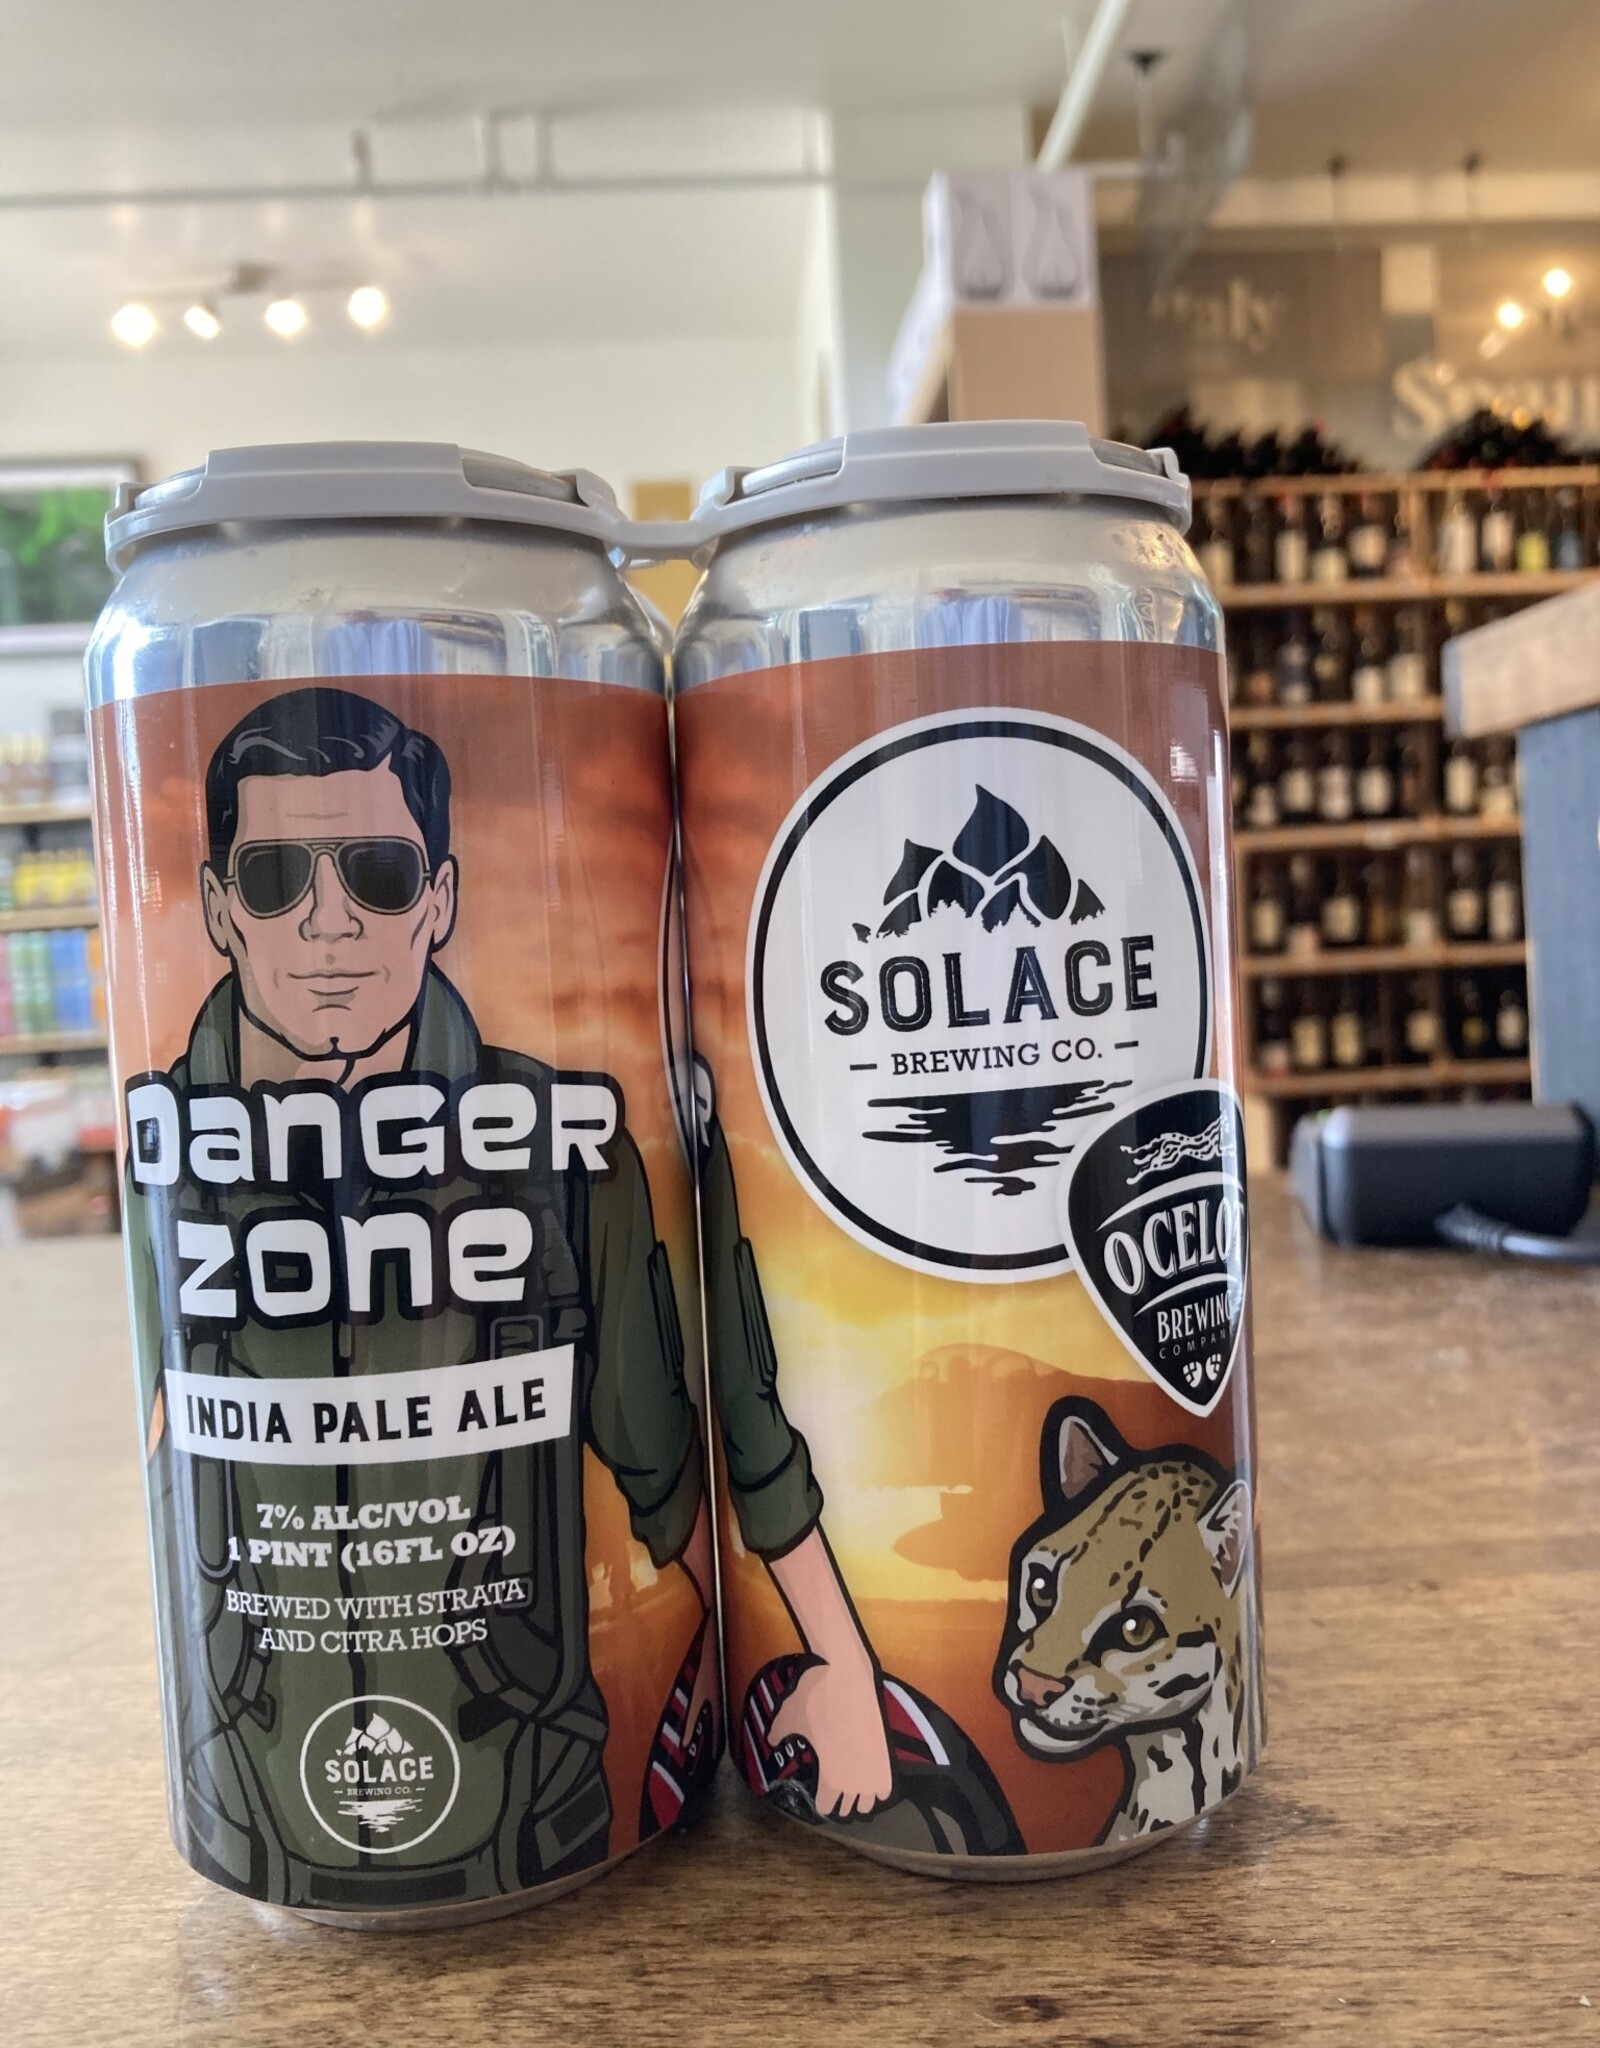 Solace Solace Brewing Co & Ocelot Brewing "Danger Zone" IPA